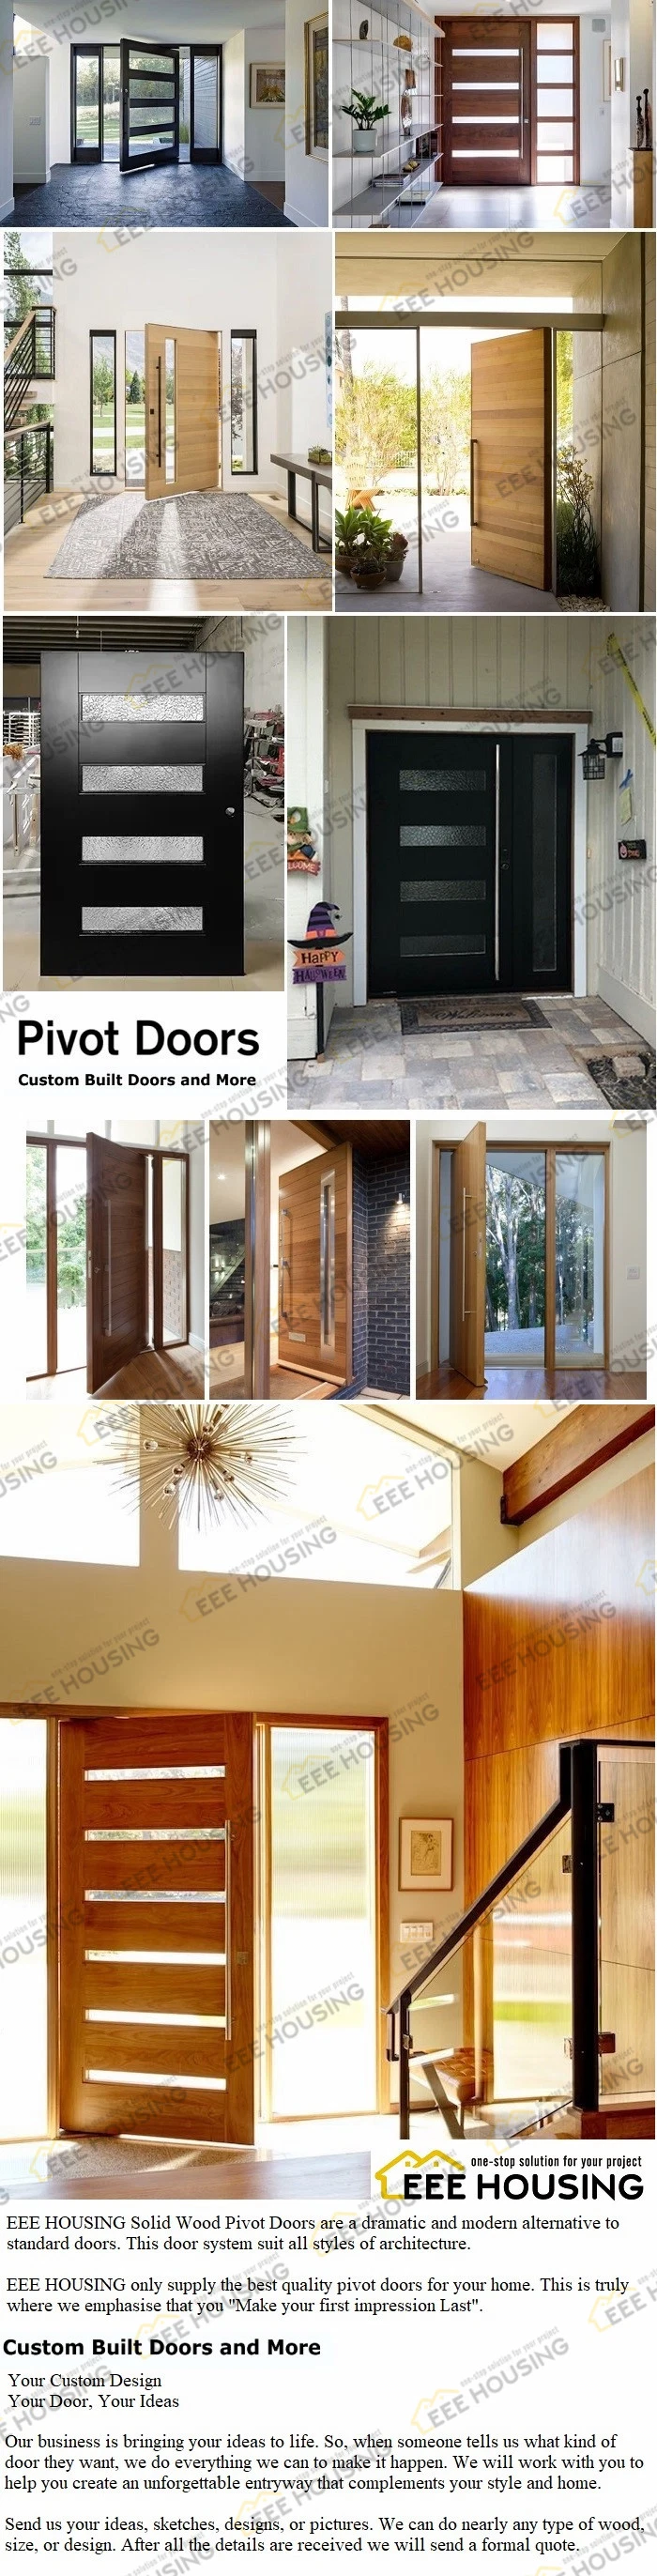 China Factory Direct Supply Exterior Main Entry Door Glass Pivot Solid Wood Doors for Residential Entryway